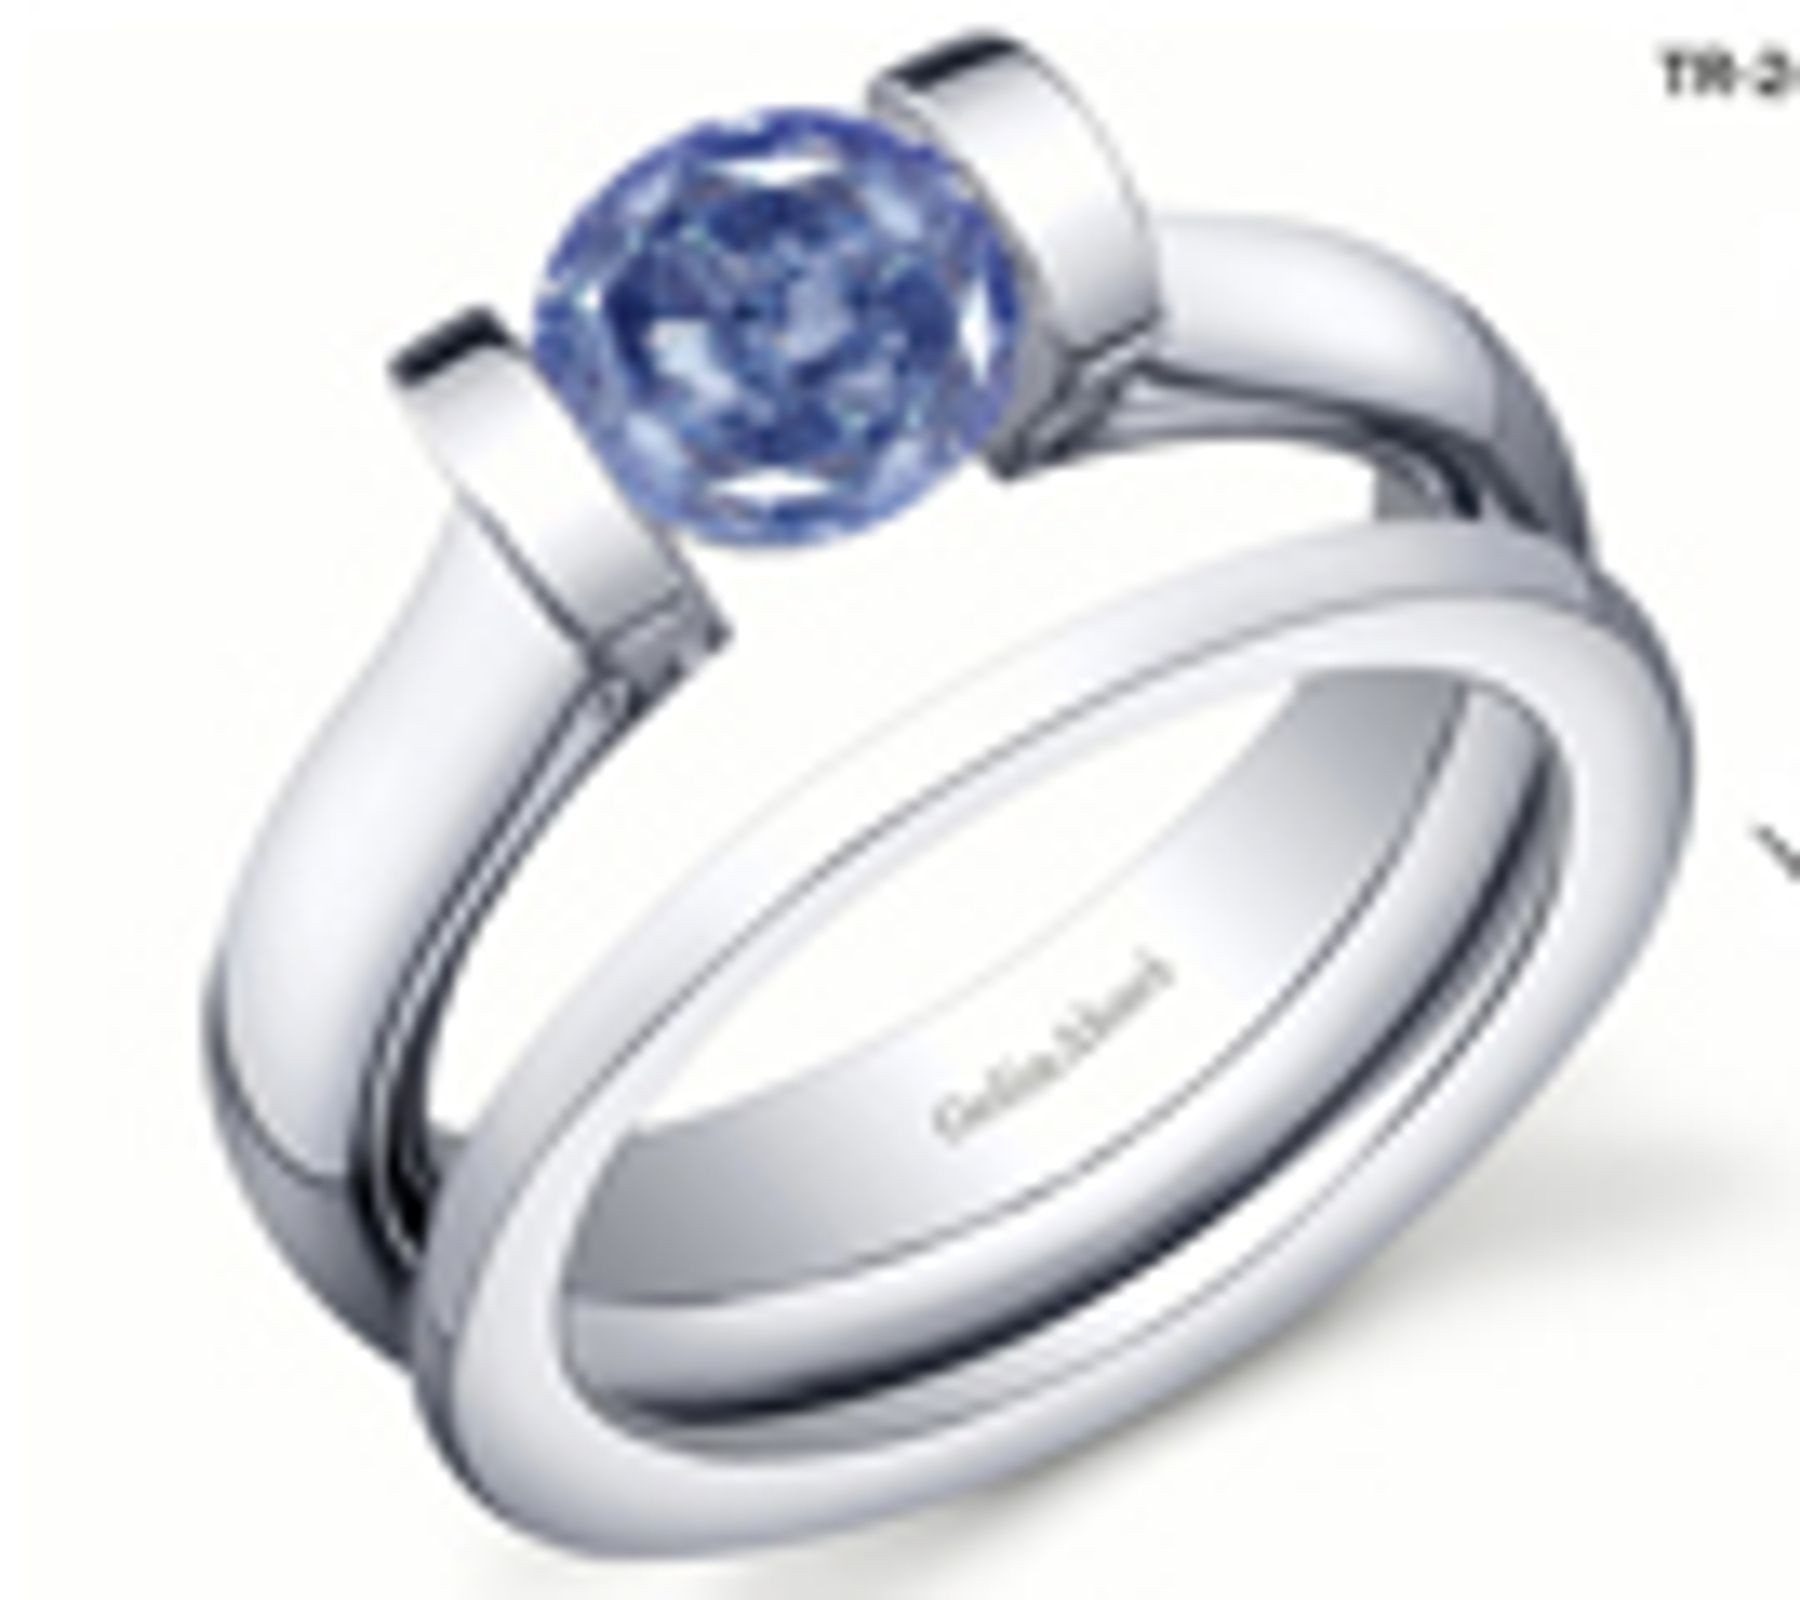 Exclusive Style Tension Set Jewelry: Tension Set Blue Diamond Rings